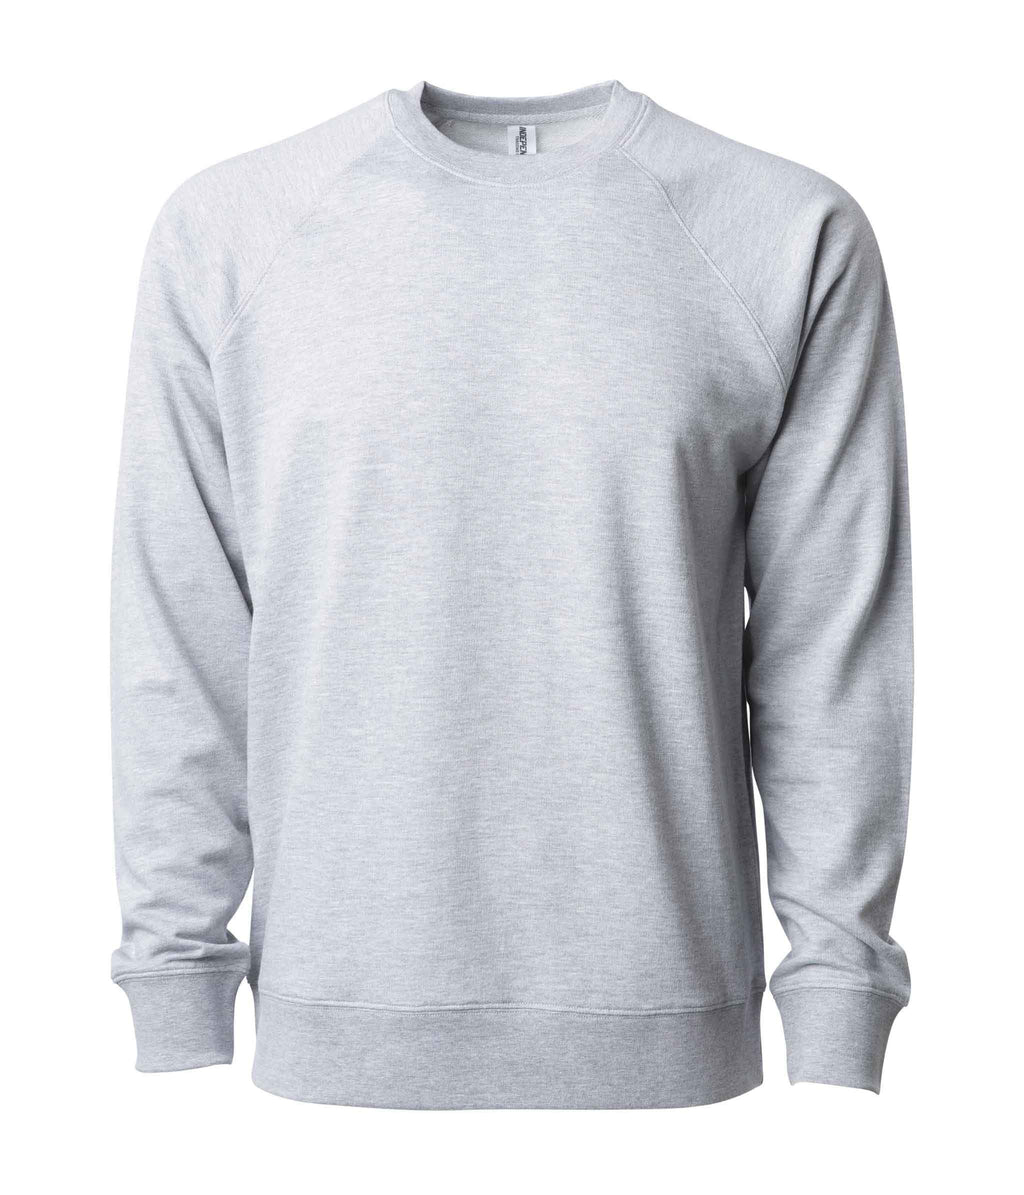 Chez Branded Unisex Sweater - Heather Grey (Made to Order)